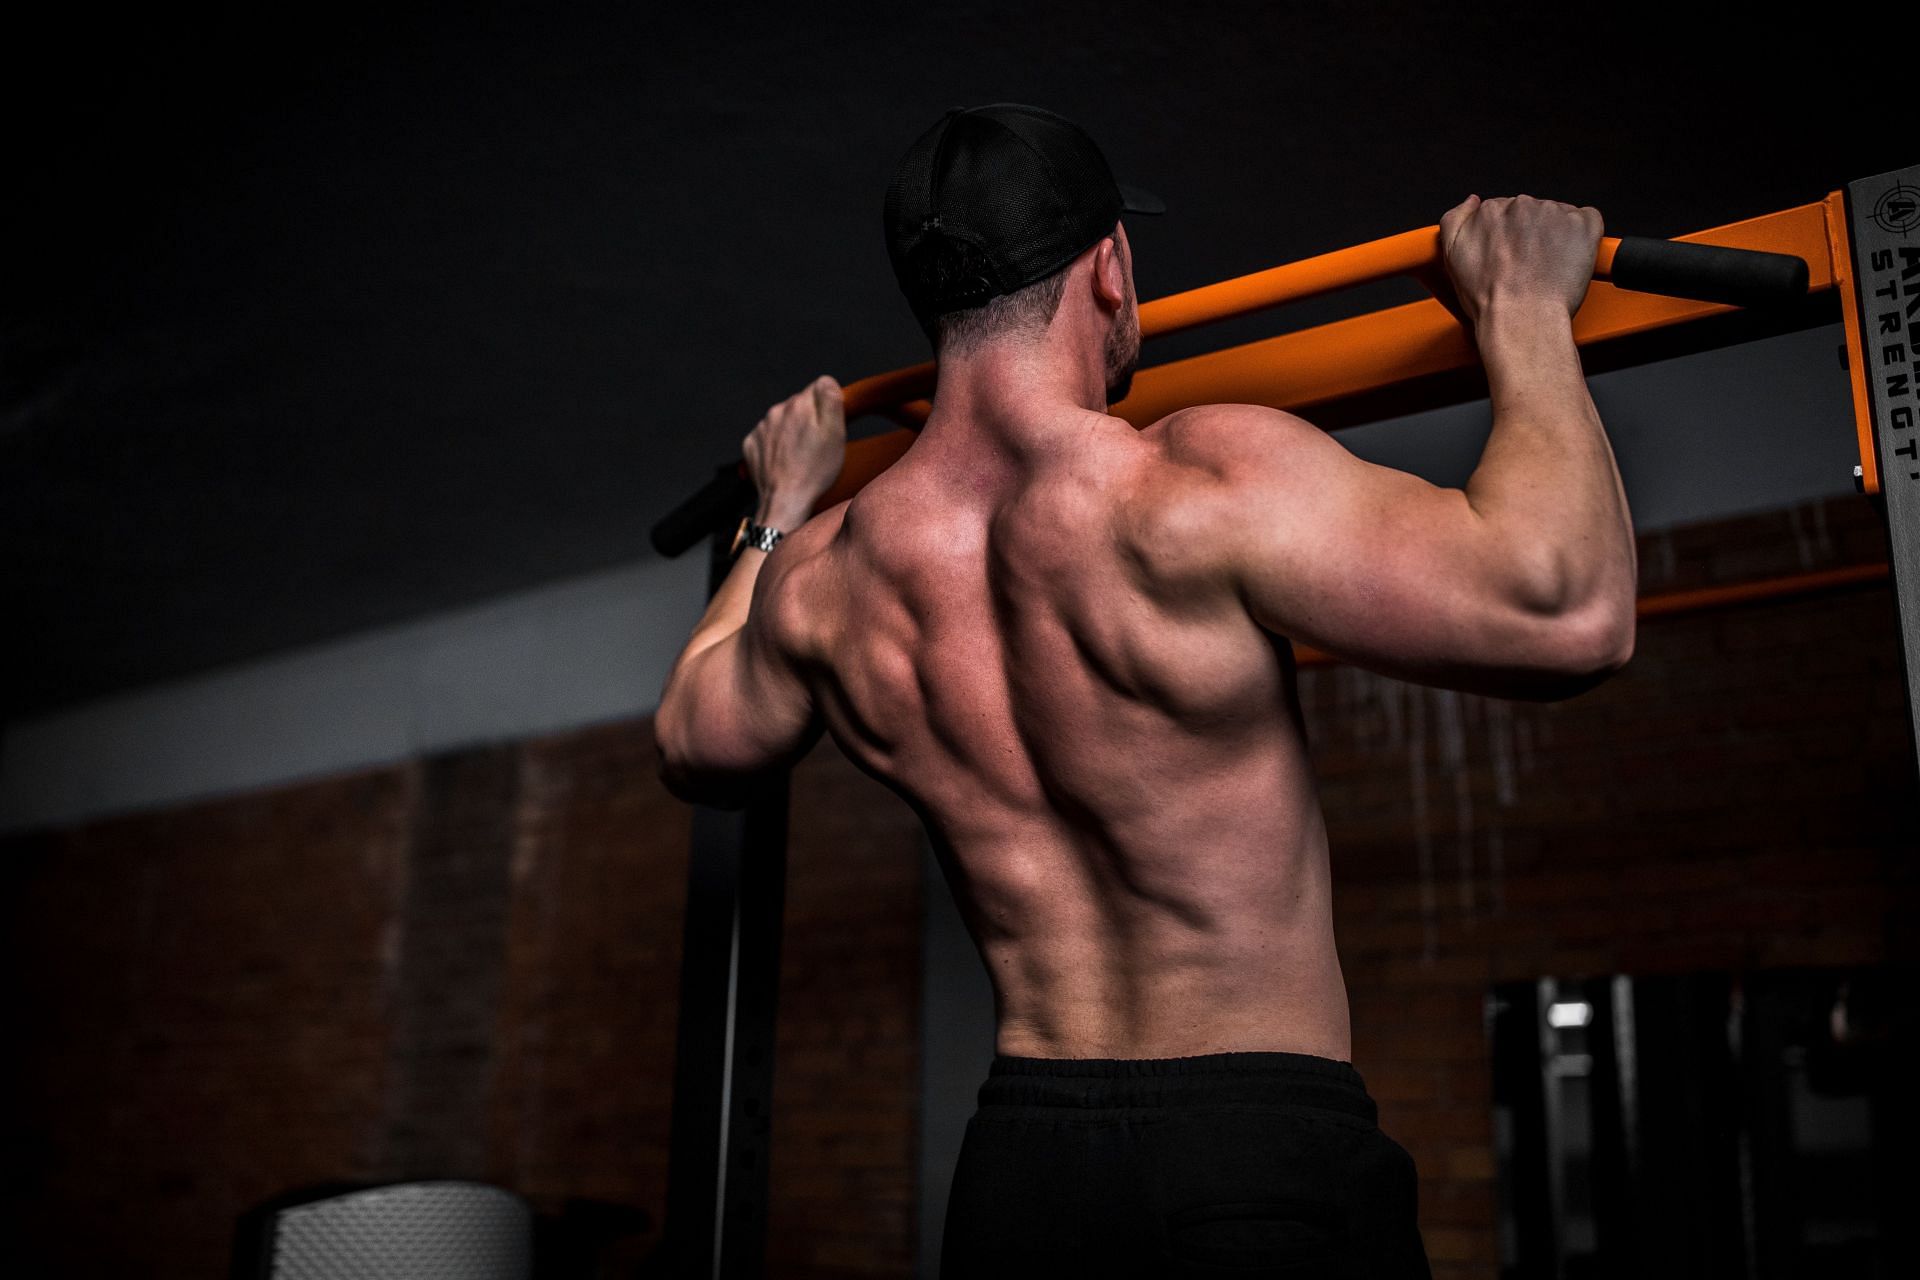 Cable pullovers help you build a strong back. (Image via Unsplash/ Anastase Maragos)